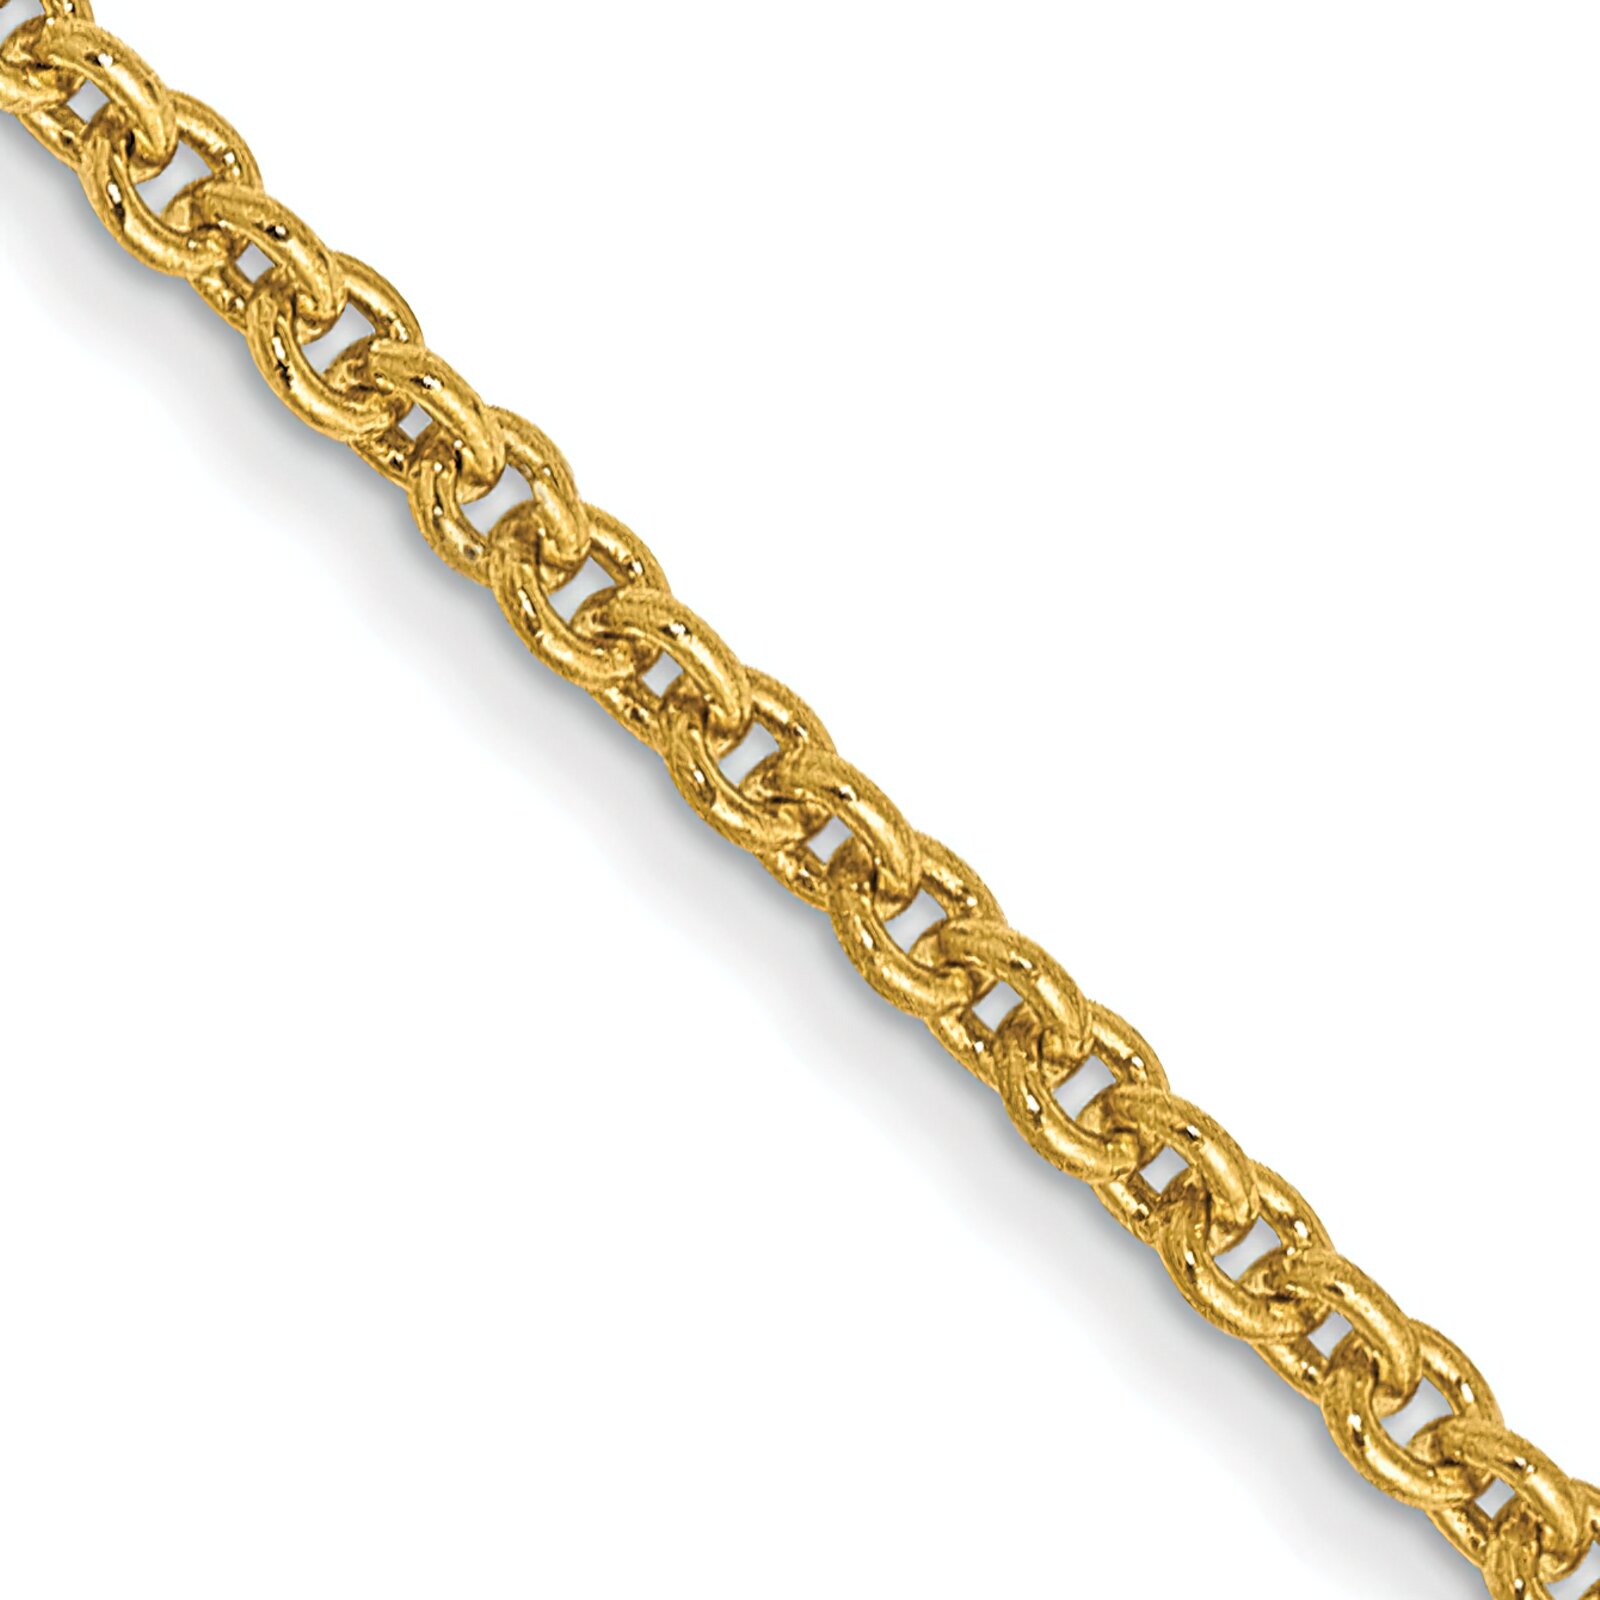 Findingking 14K Yellow Gold 1.5mm Cable Chain Necklace Jewelry 16"